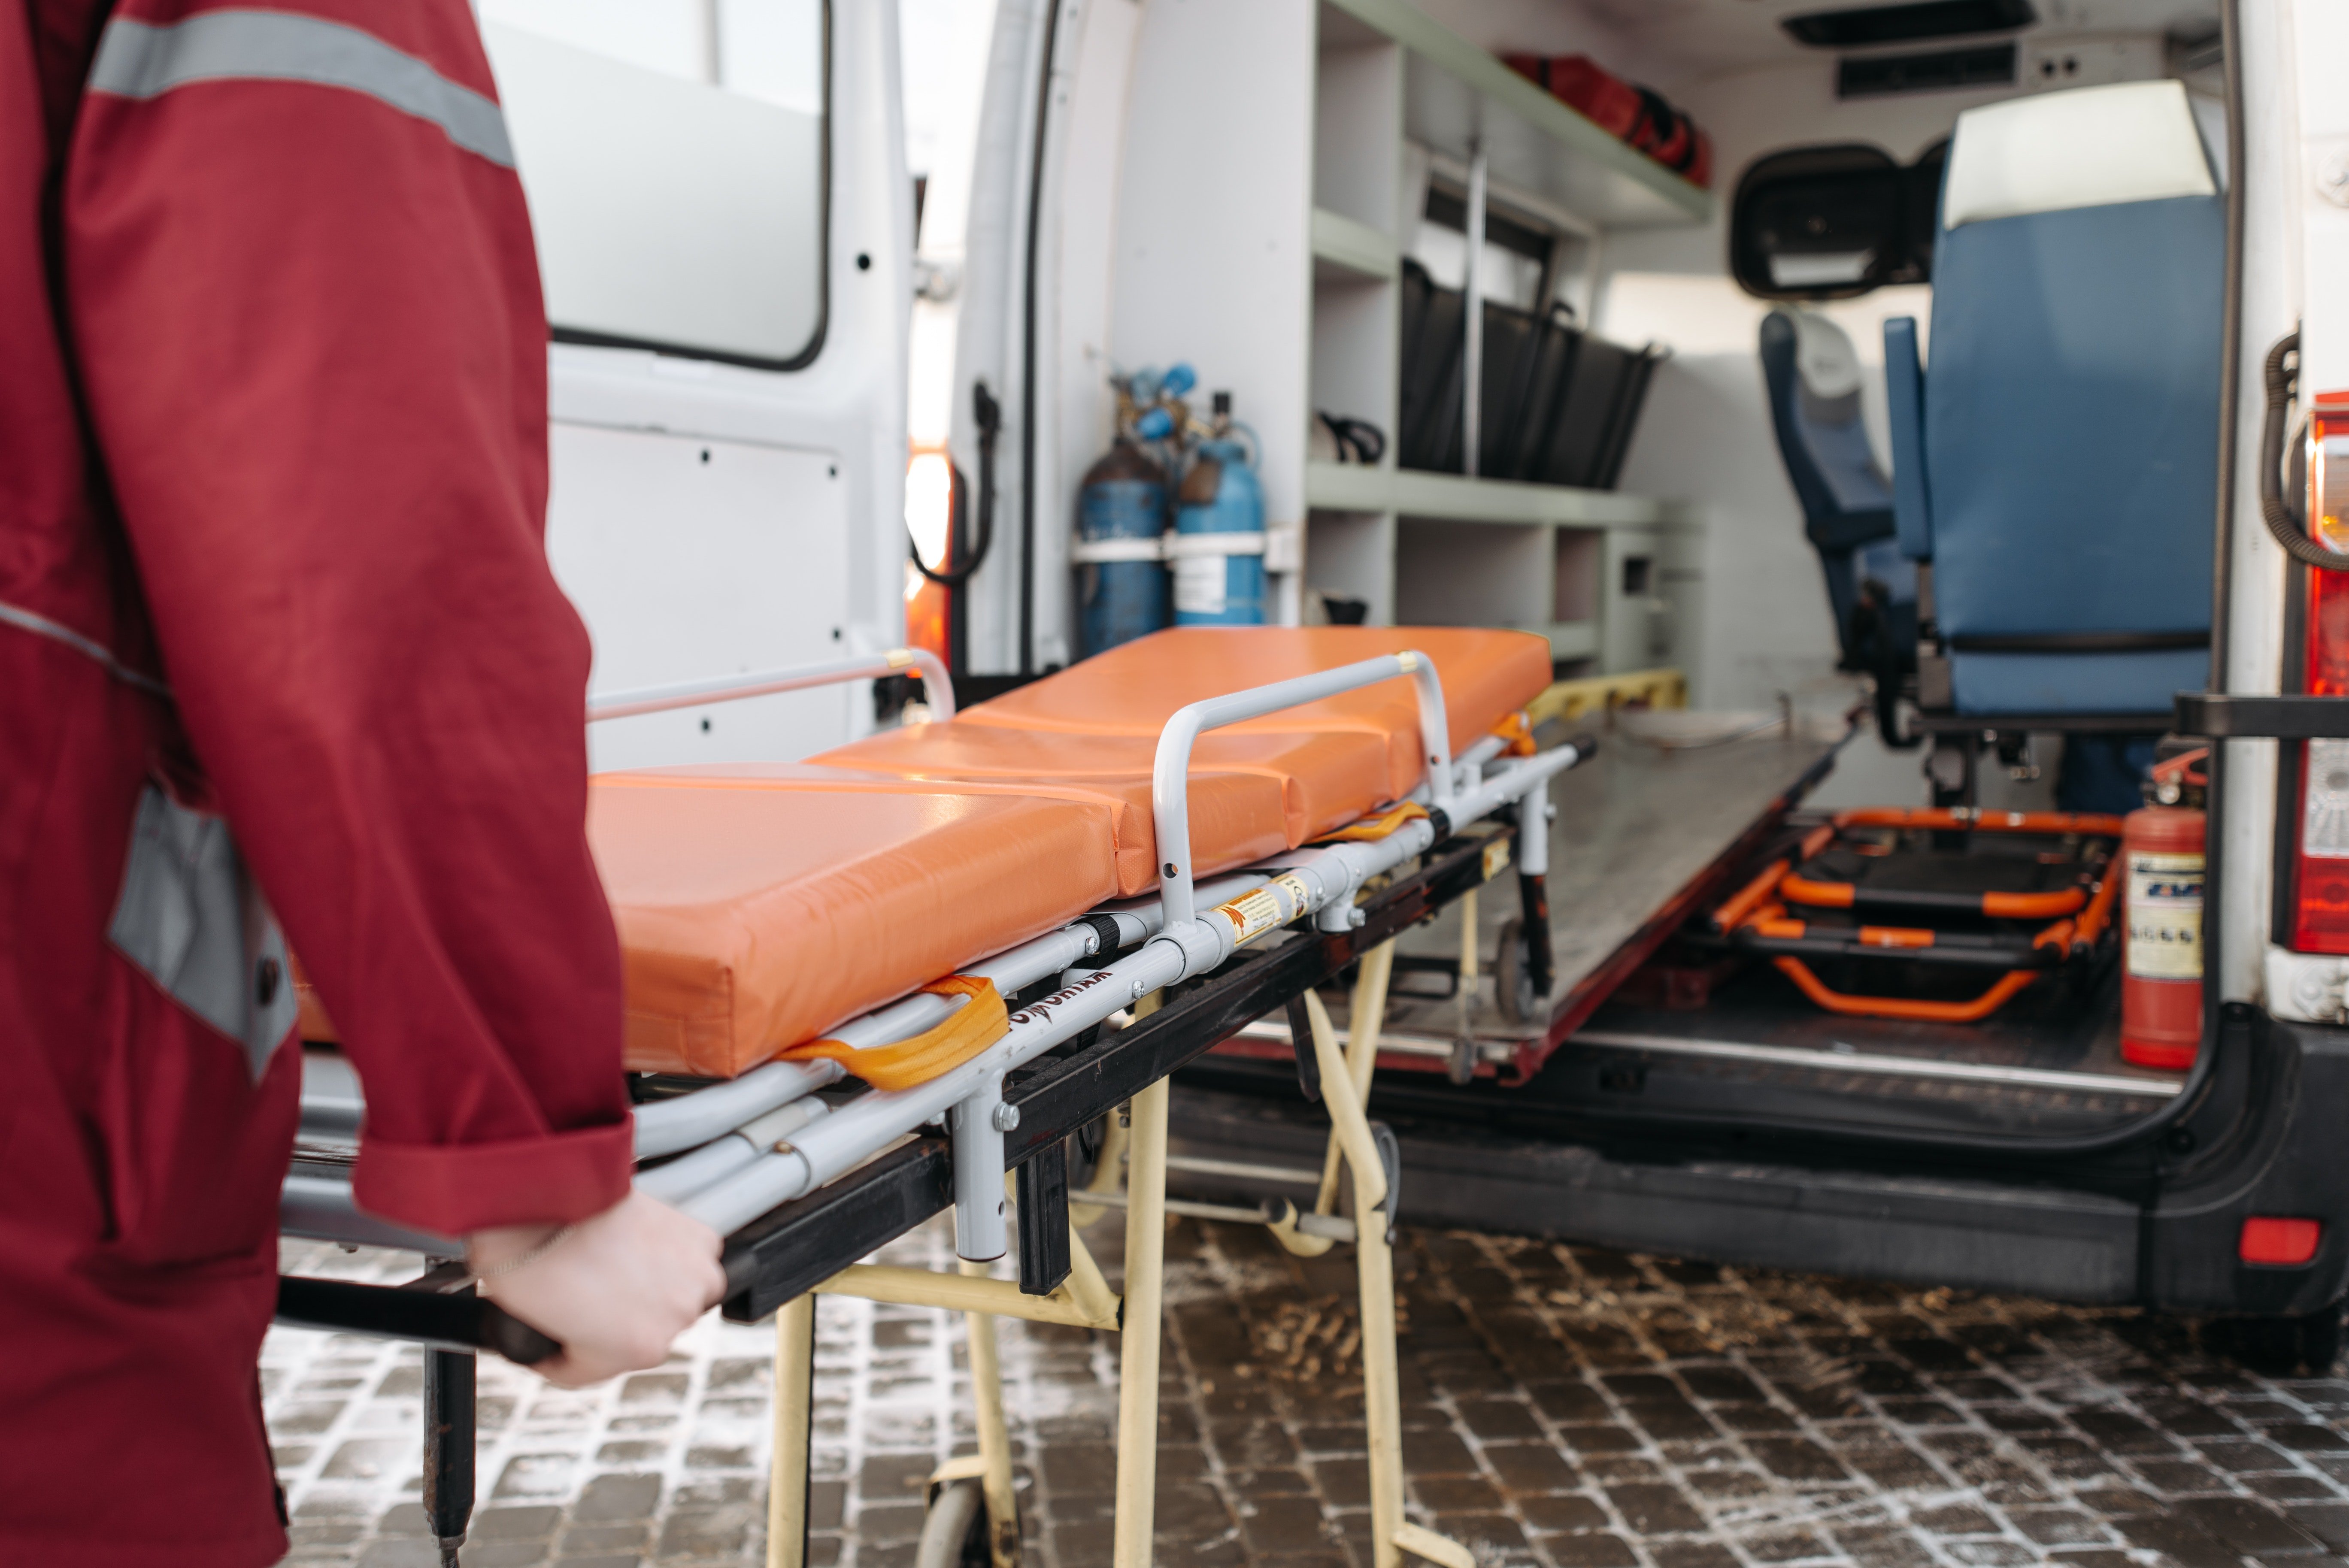 Pictured - A man pushing a stretcher into the ambulance | Source: Pexels